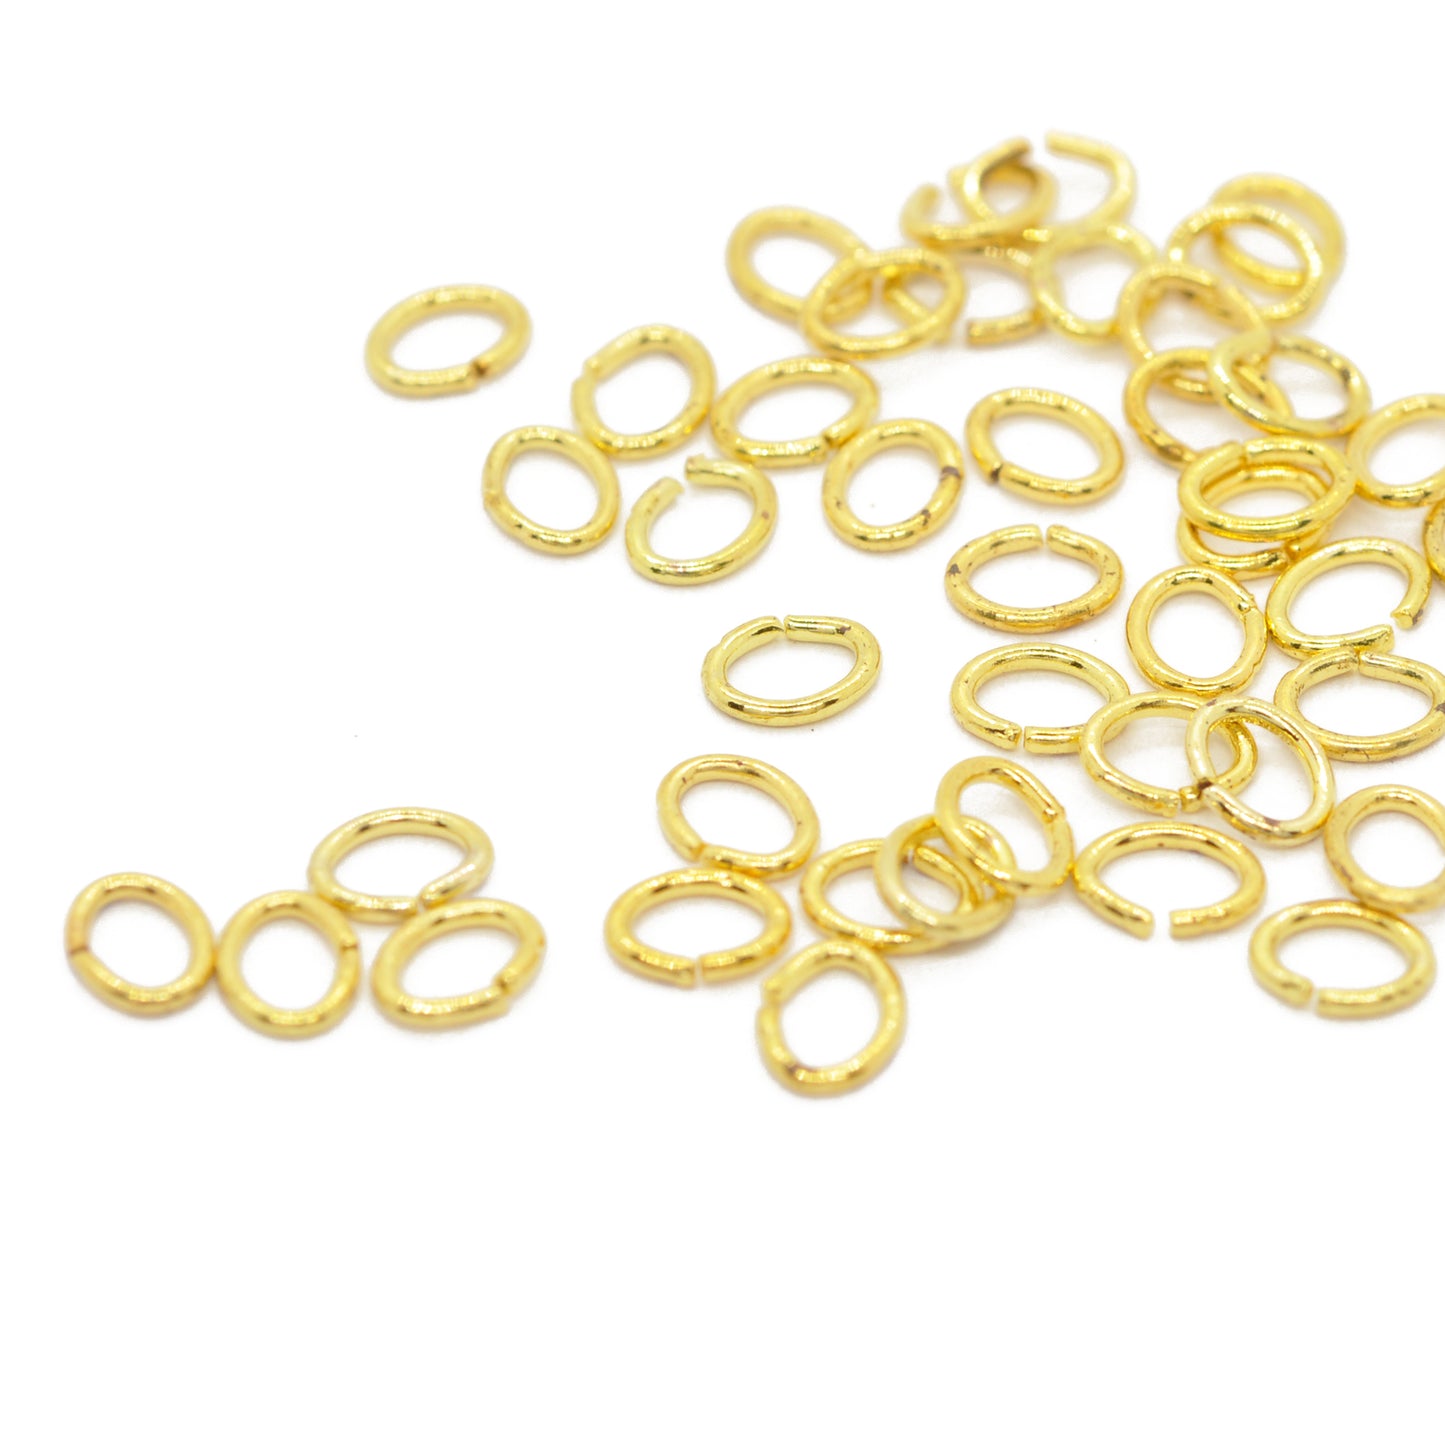 Eyelet binding ring oval / gold-colored / 50 pcs.